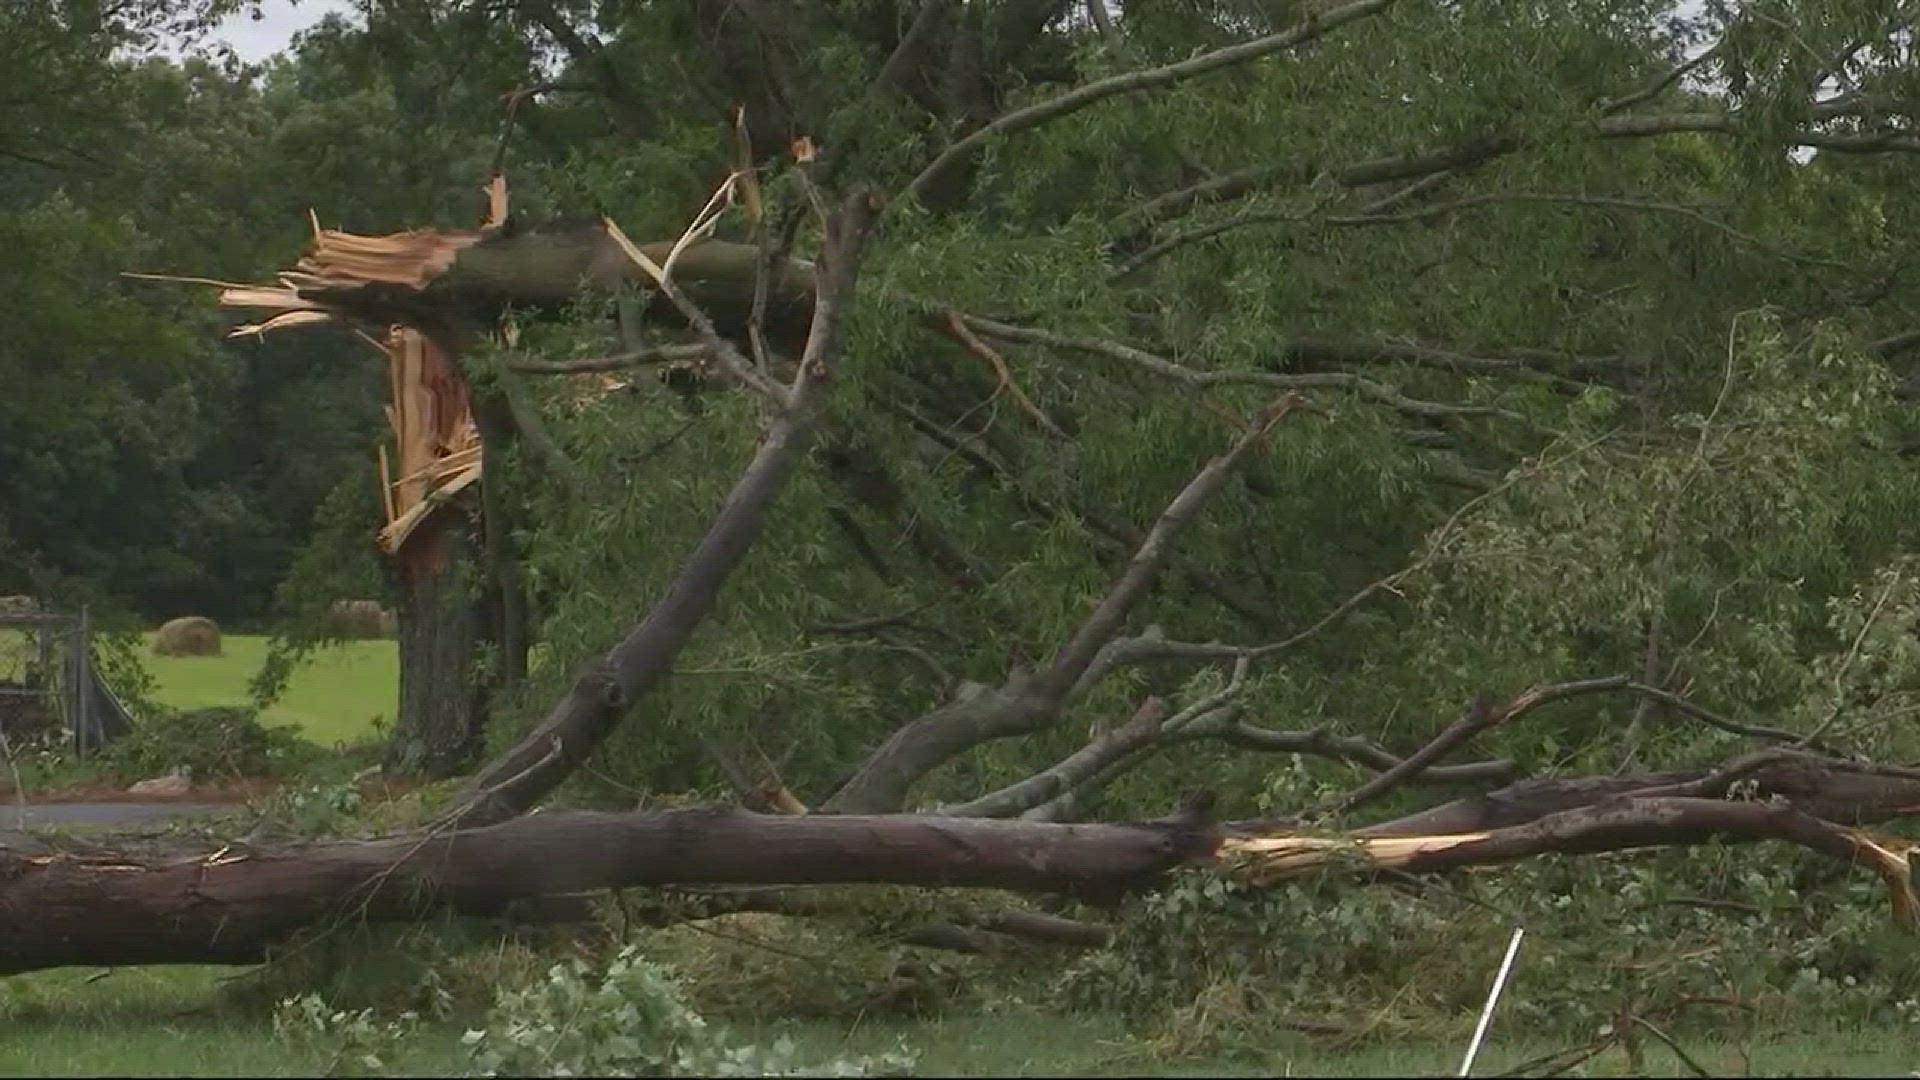 several homes were damaged or destroyed in the Iredell County area.